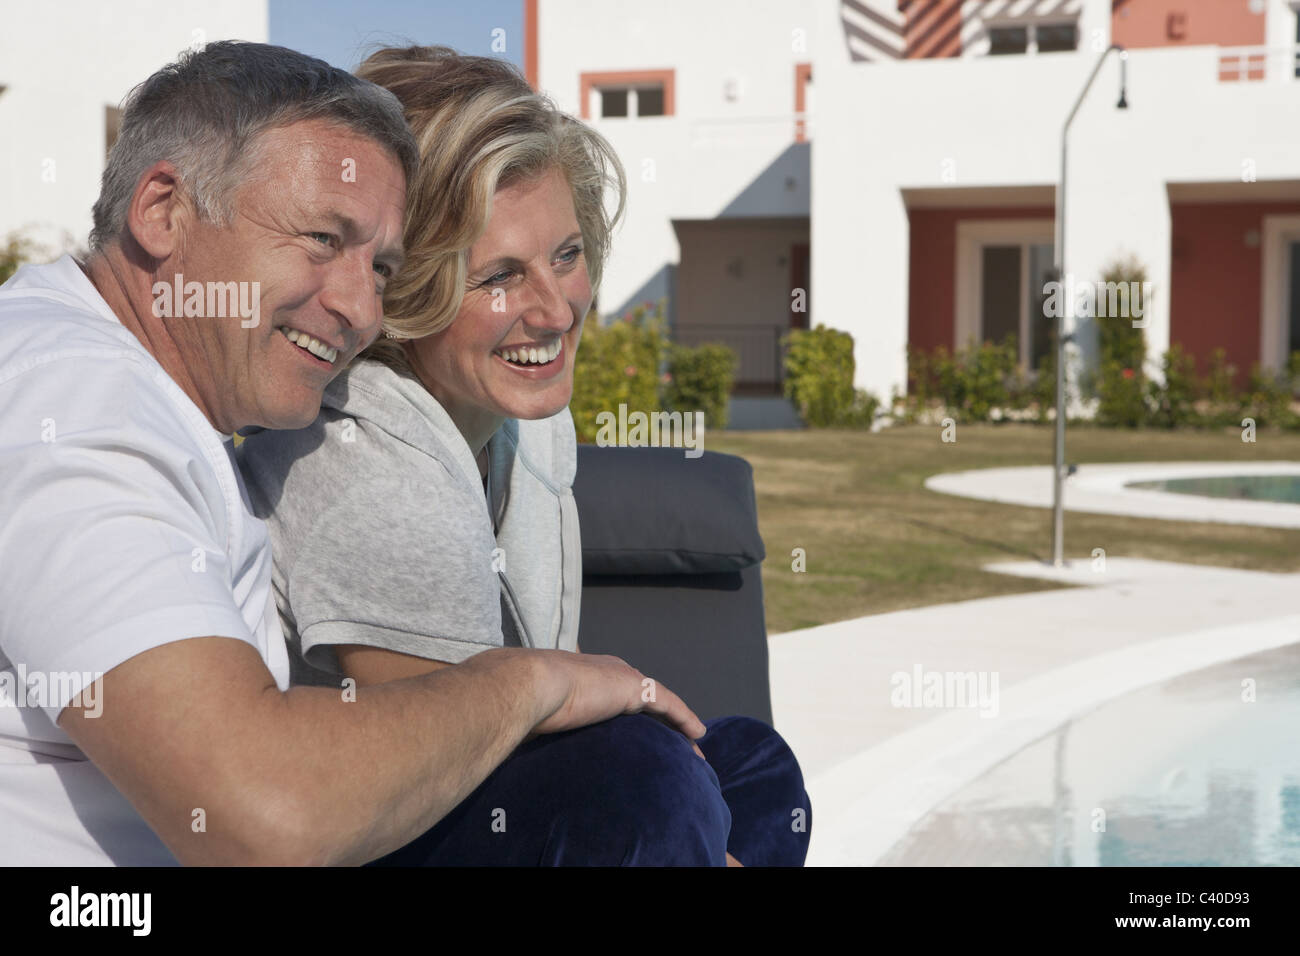 Mature couple relaxing by pool Banque D'Images